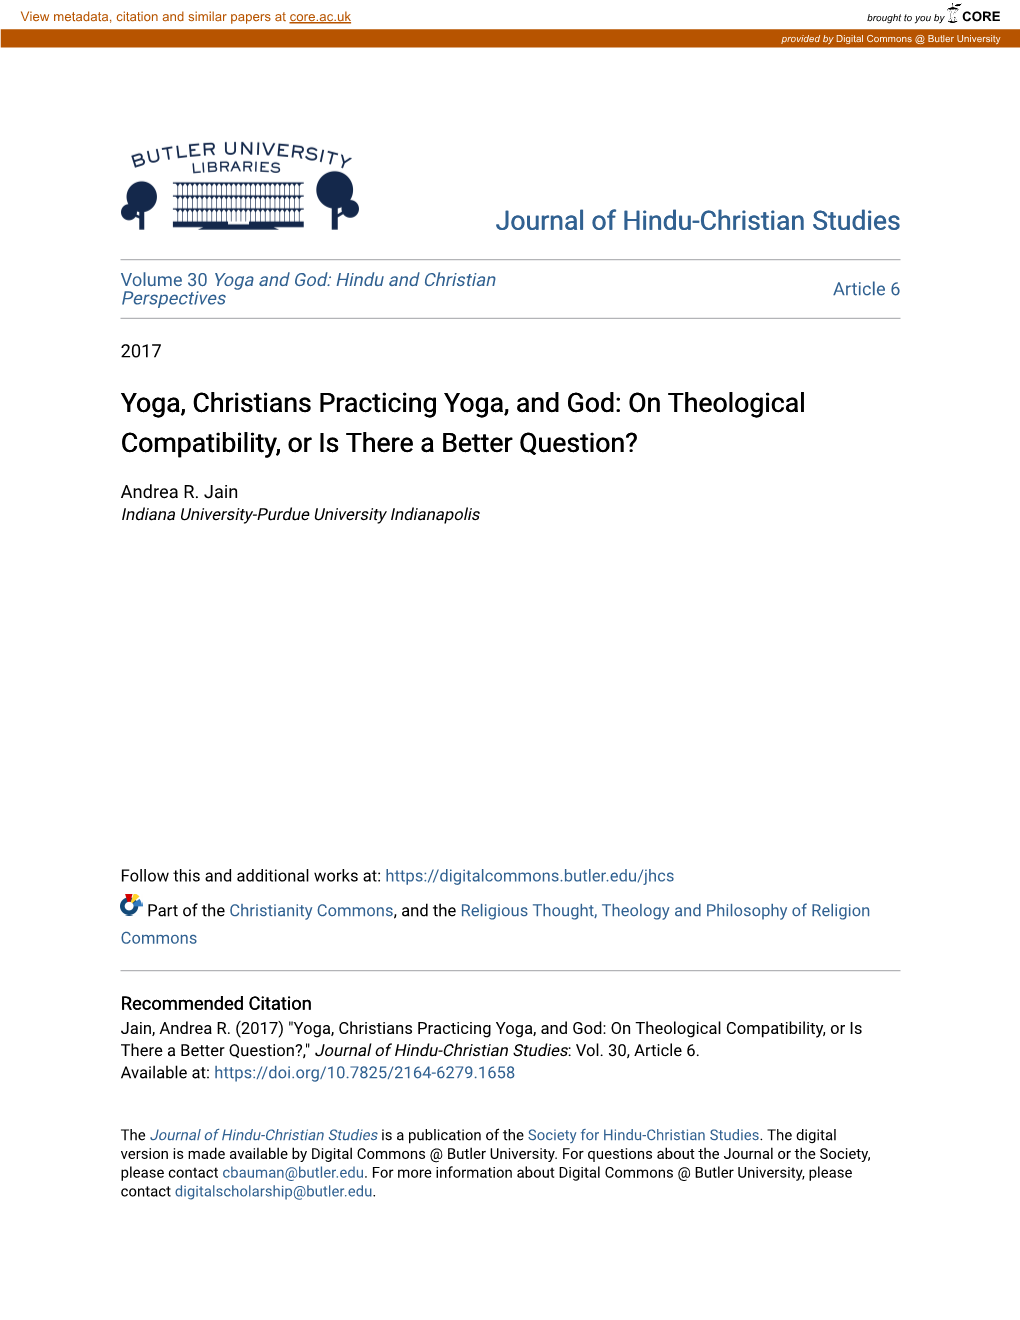 Yoga, Christians Practicing Yoga, and God: on Theological Compatibility, Or Is There a Better Question?